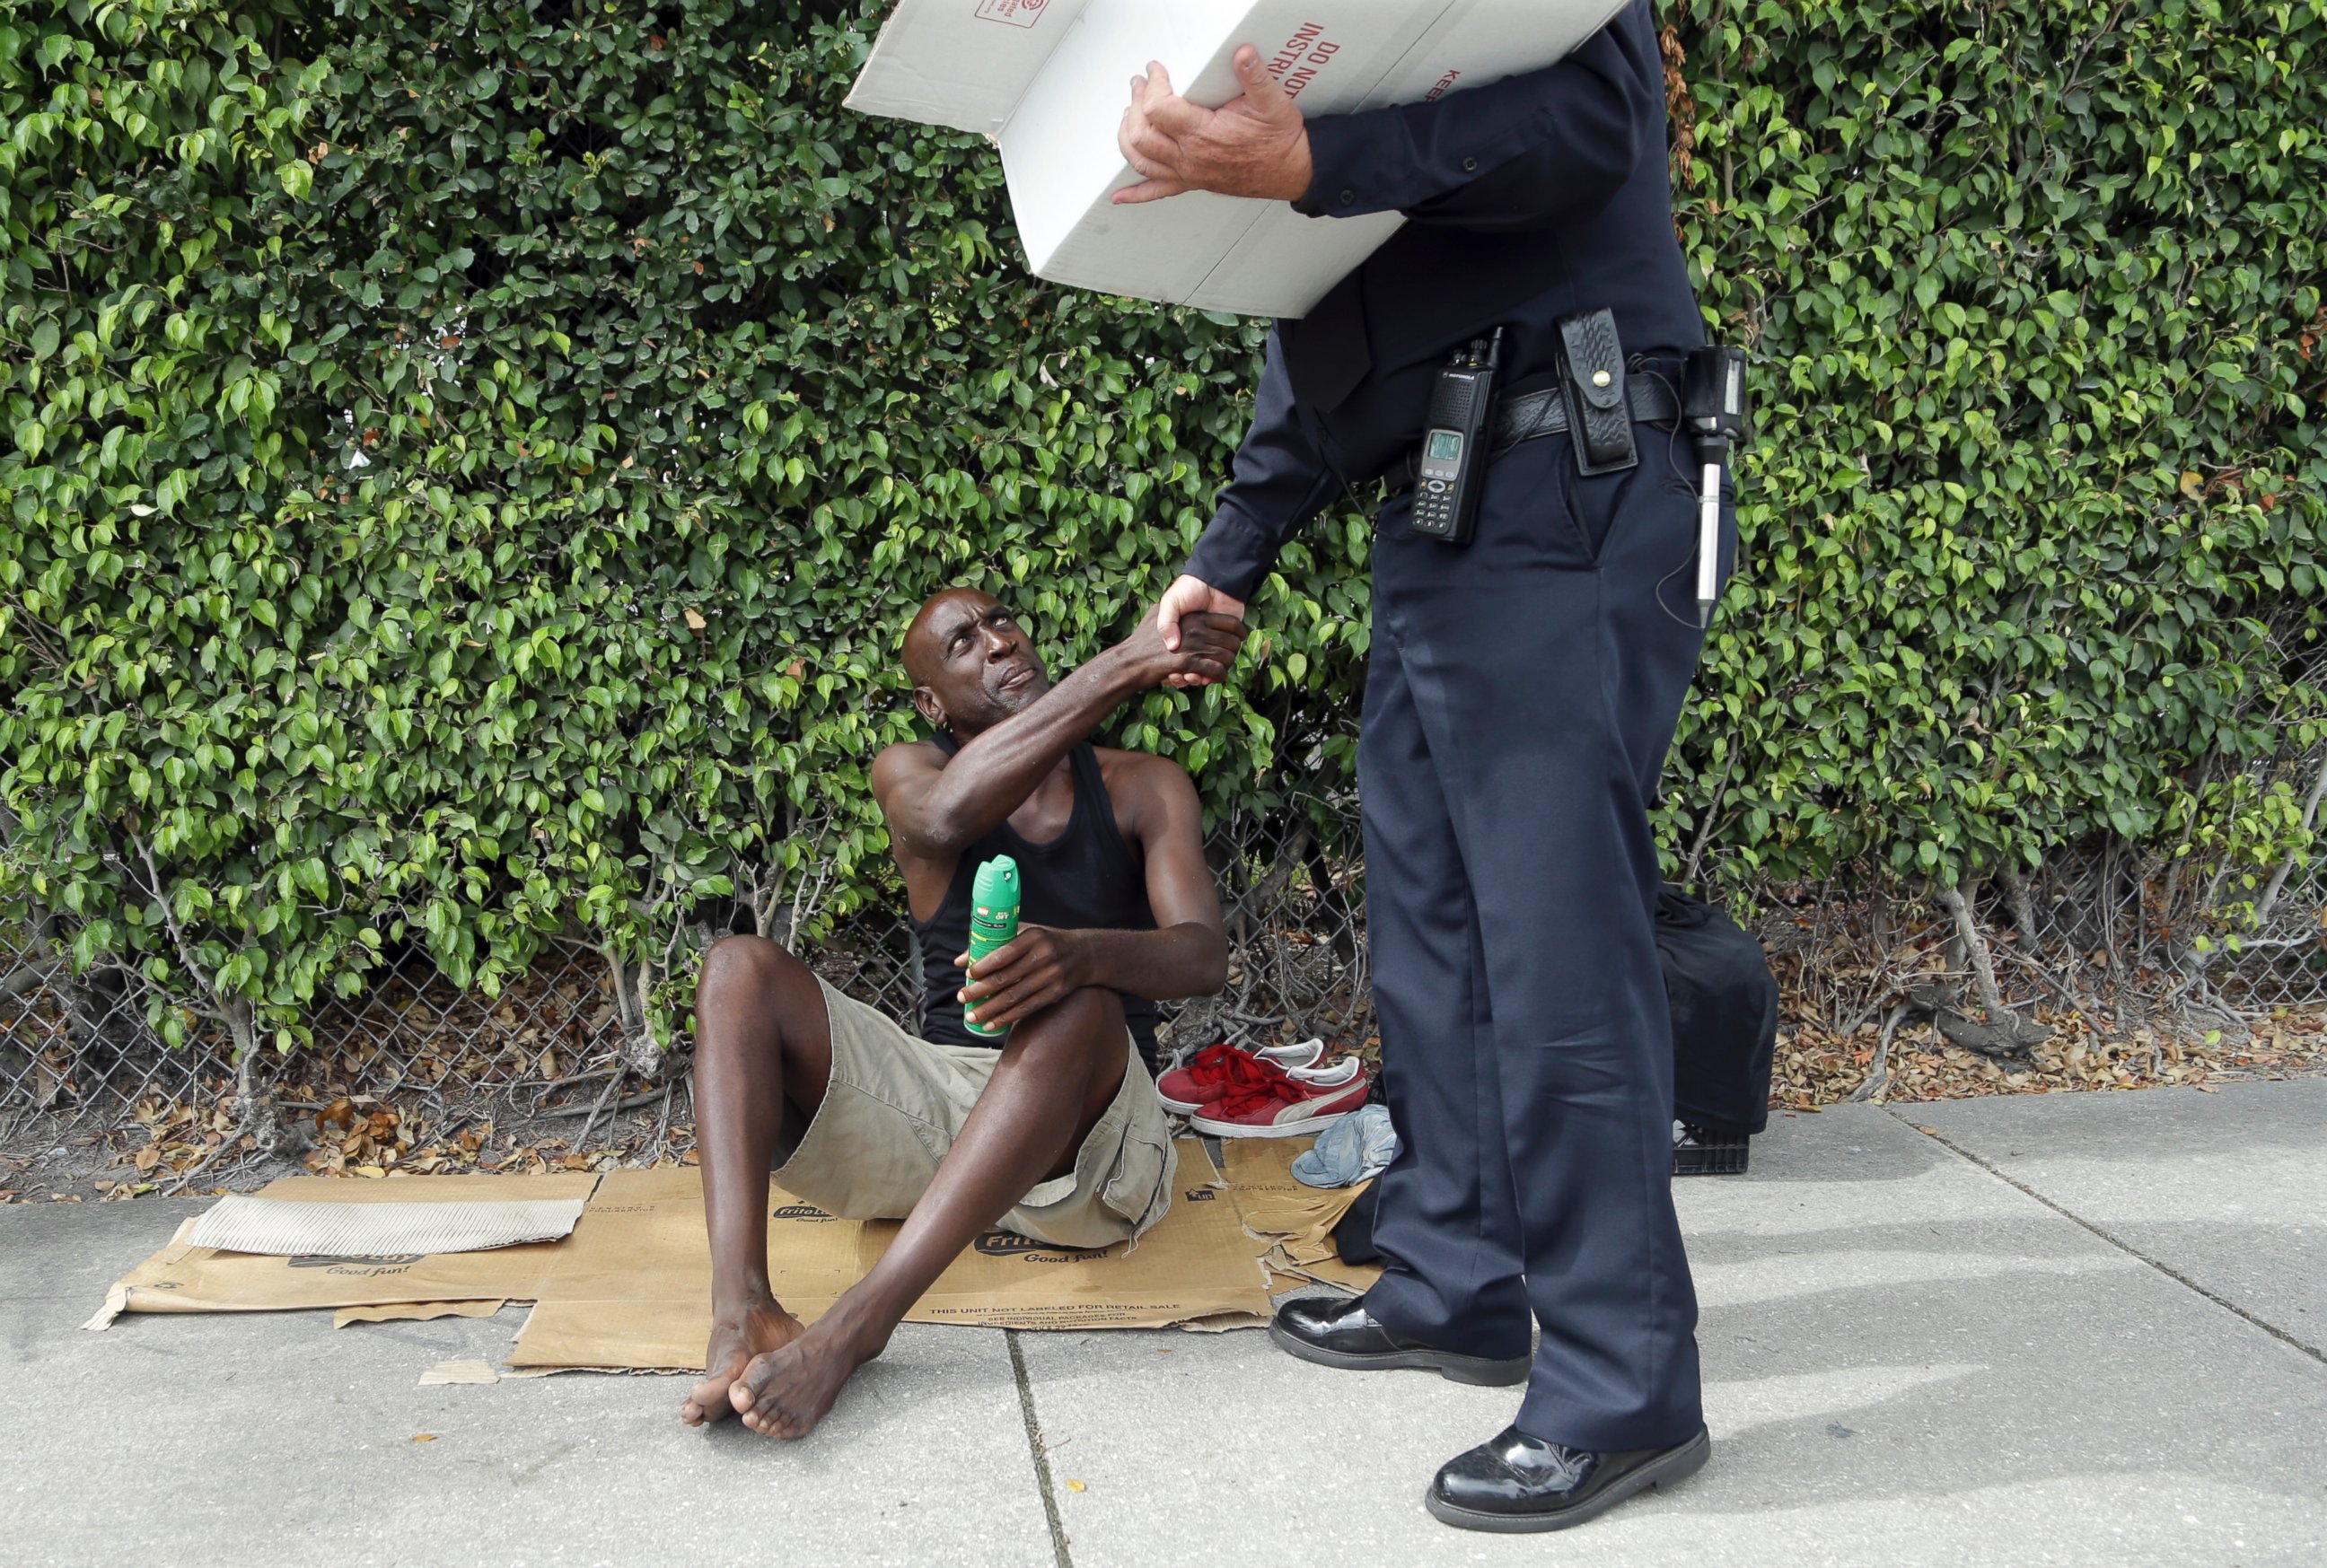 PHOTO: Lorenzo Ward, 45, who is homeless, shakes hands with Miami police officer James Bernat, after Bernat gave him a can of insect repellent, Aug. 2, 2016 in the Wynwood neighborhood of Miami.